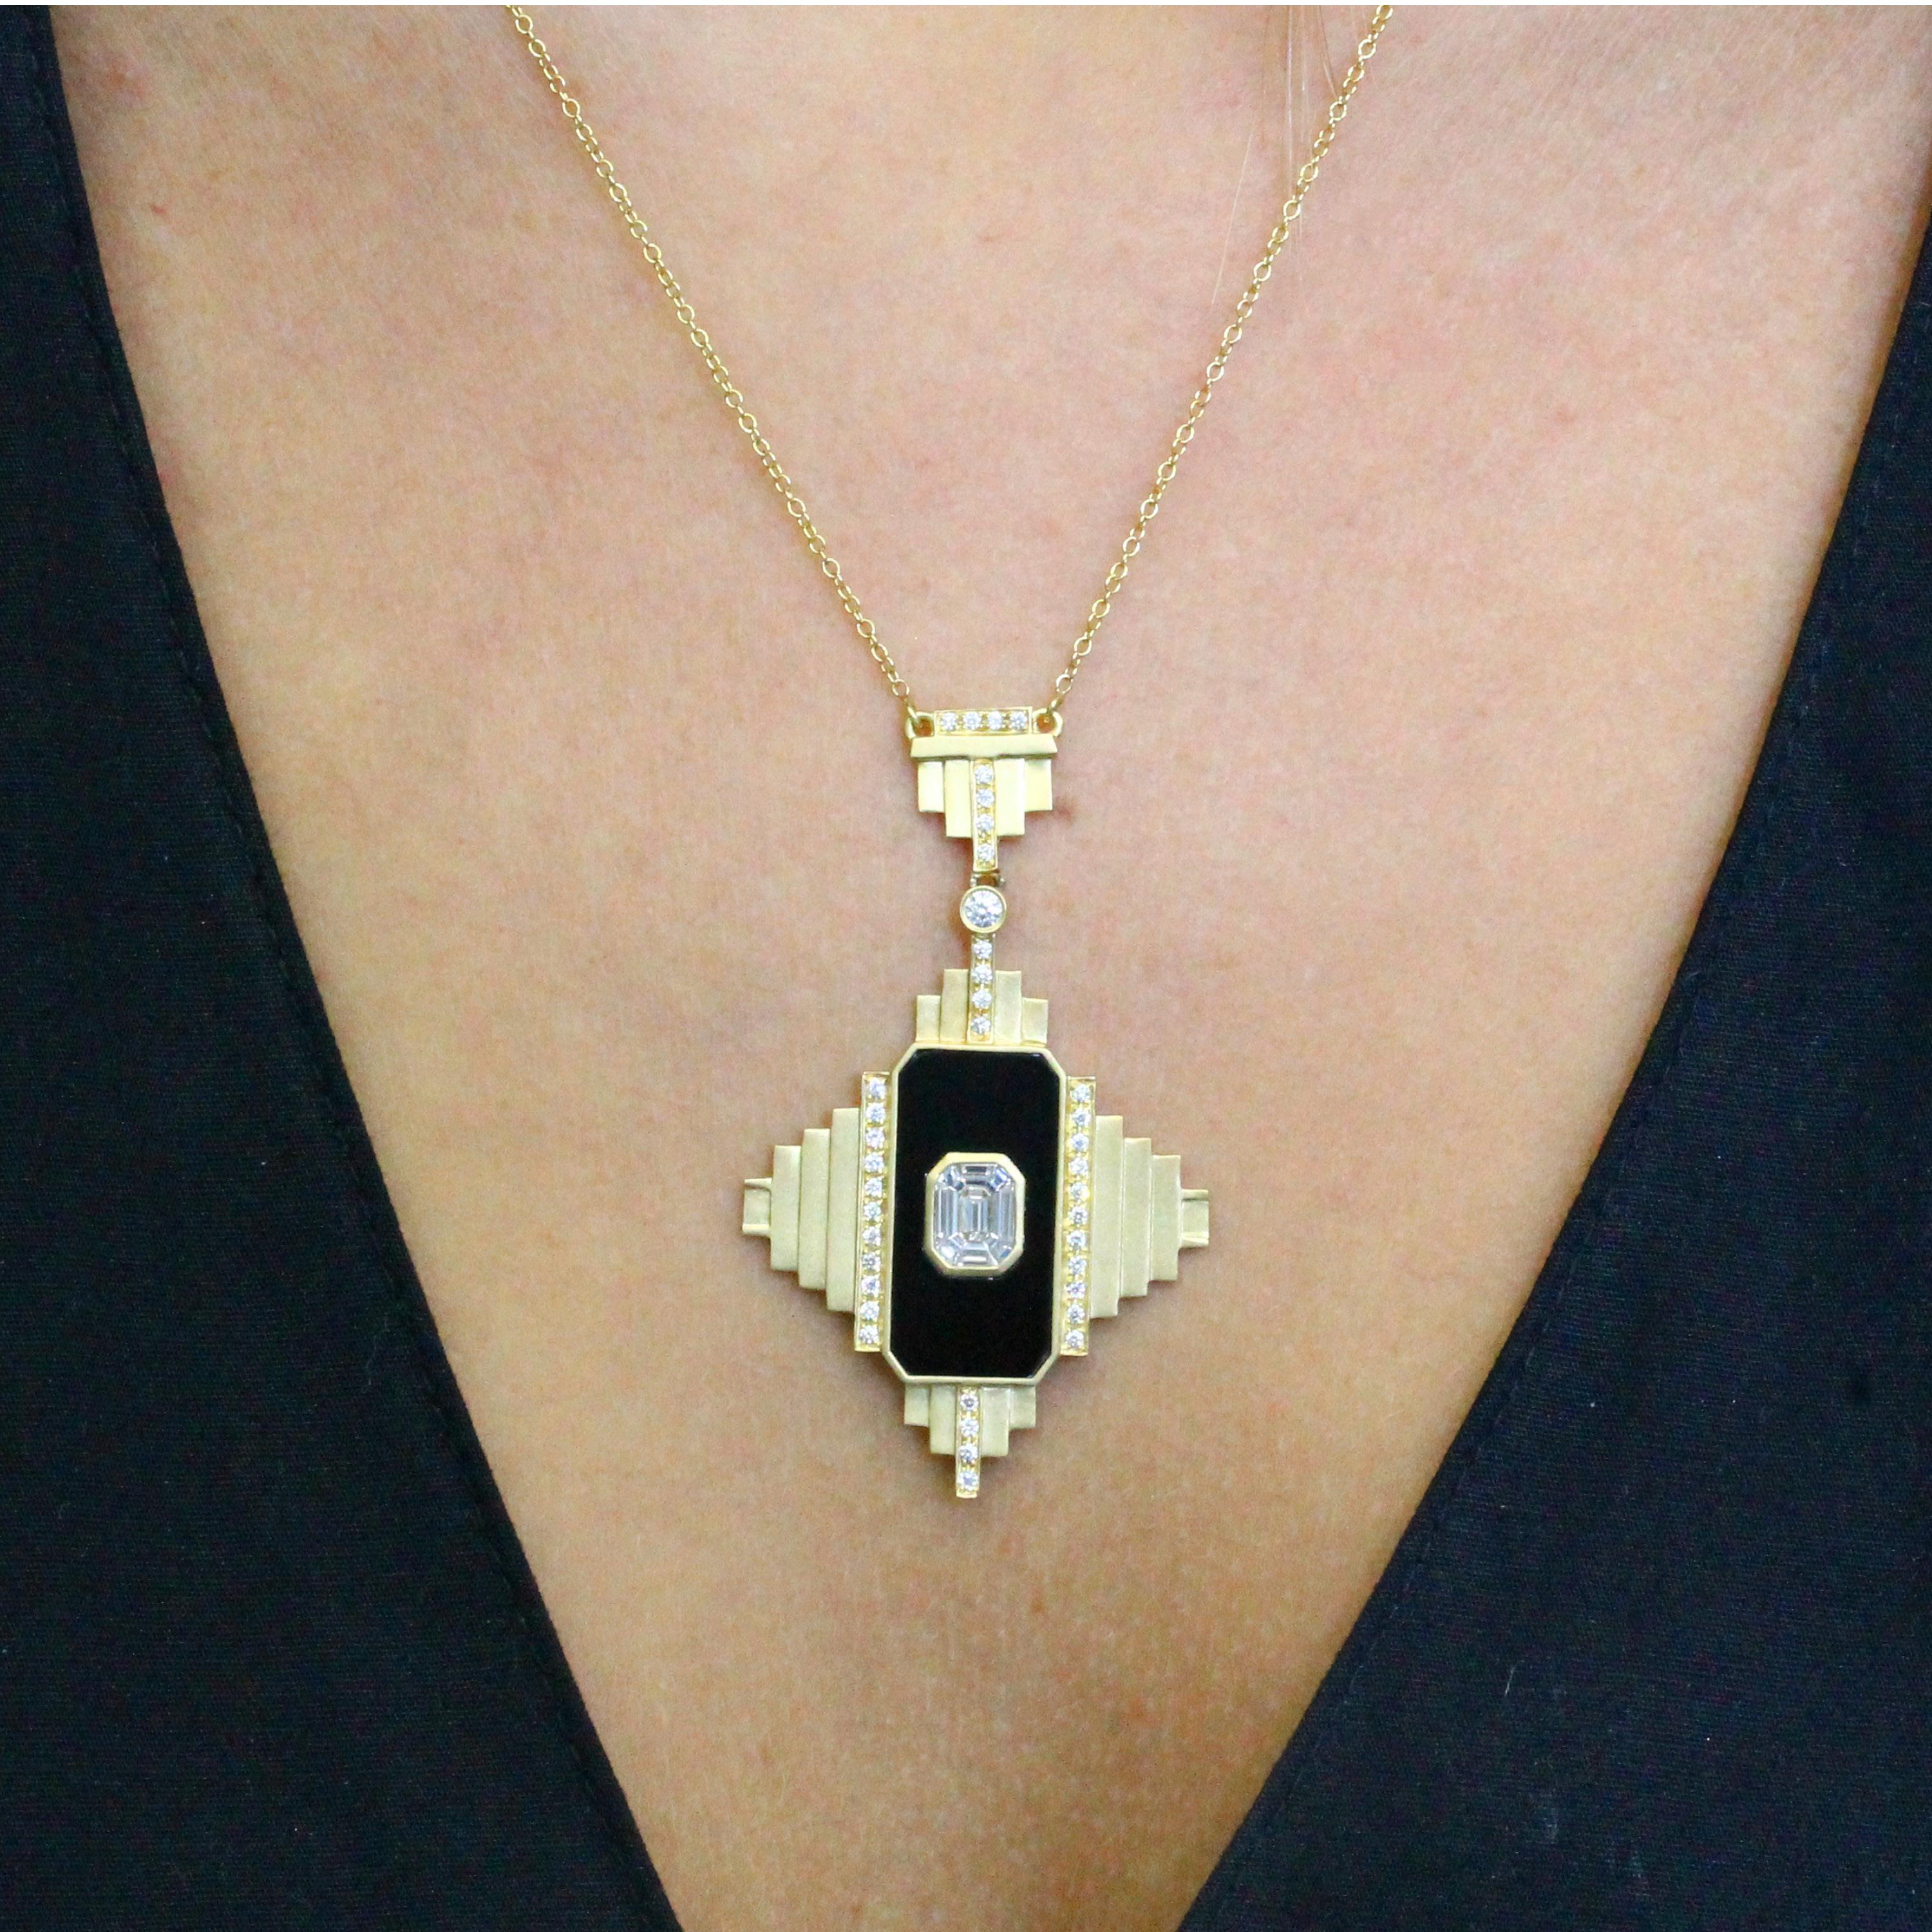 One-of-a-Kind Necklace featuring an Invisible-Set Emerald Diamond Center made up of Baguettes, framed in Black Onyx, in an 18K Yellow Gold Art-Deco style setting, hanging on an 18-inch Chain with 16-inch adjuster. Round Diamond Accents. Black Onyx